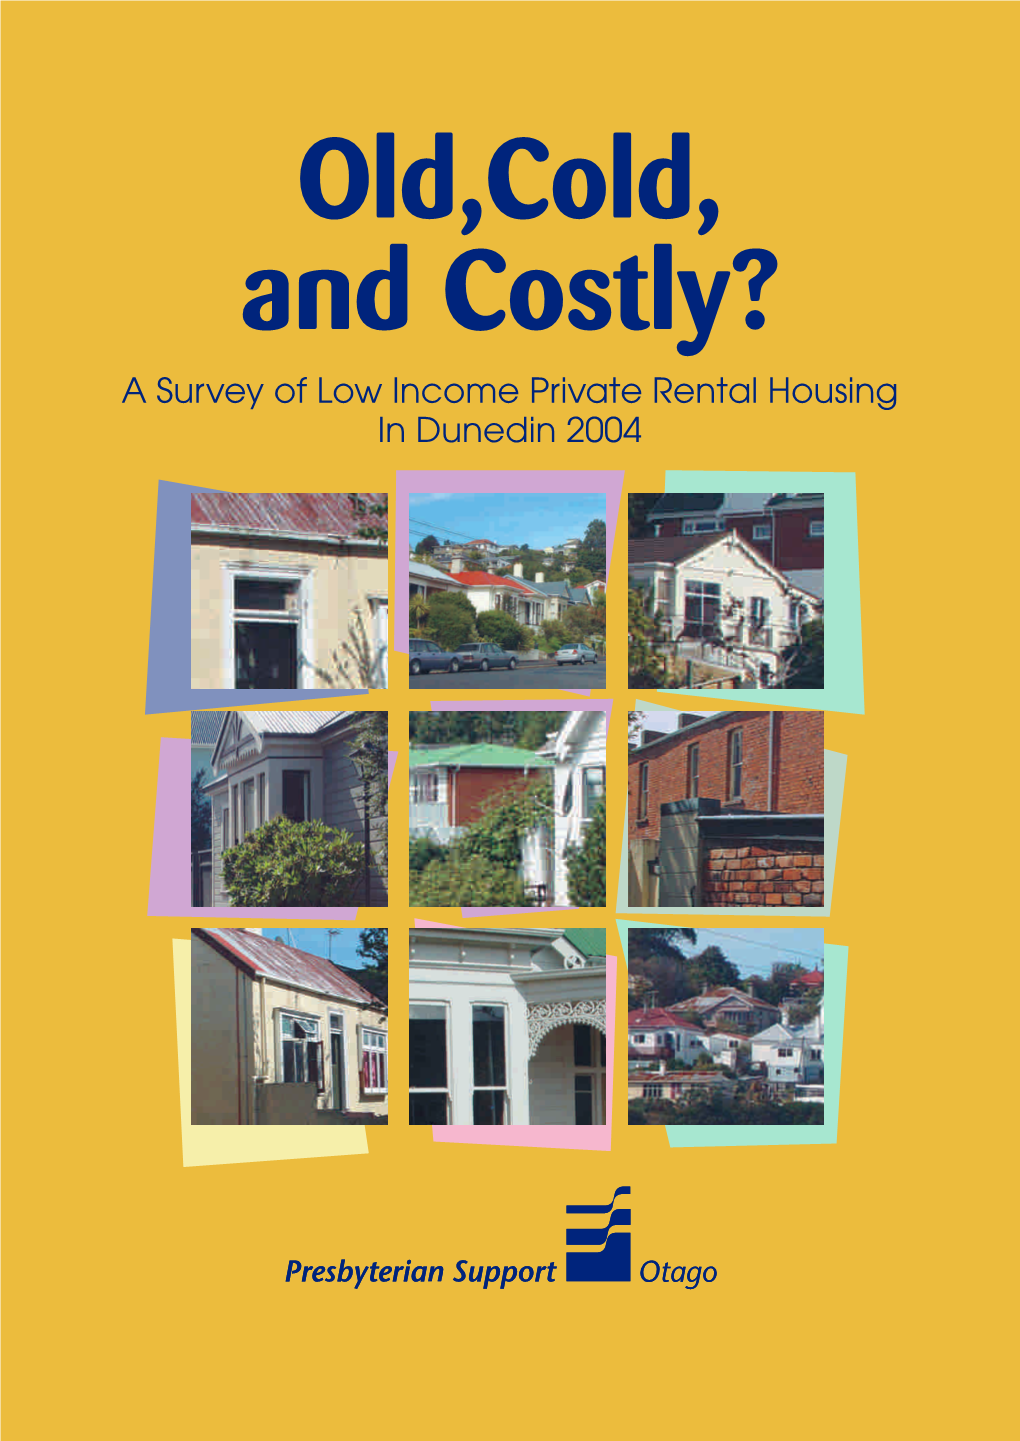 Old,Cold, and Costly? a Survey of Low Income Private Rental Housing in Dunedin 2004 Acknowledgements